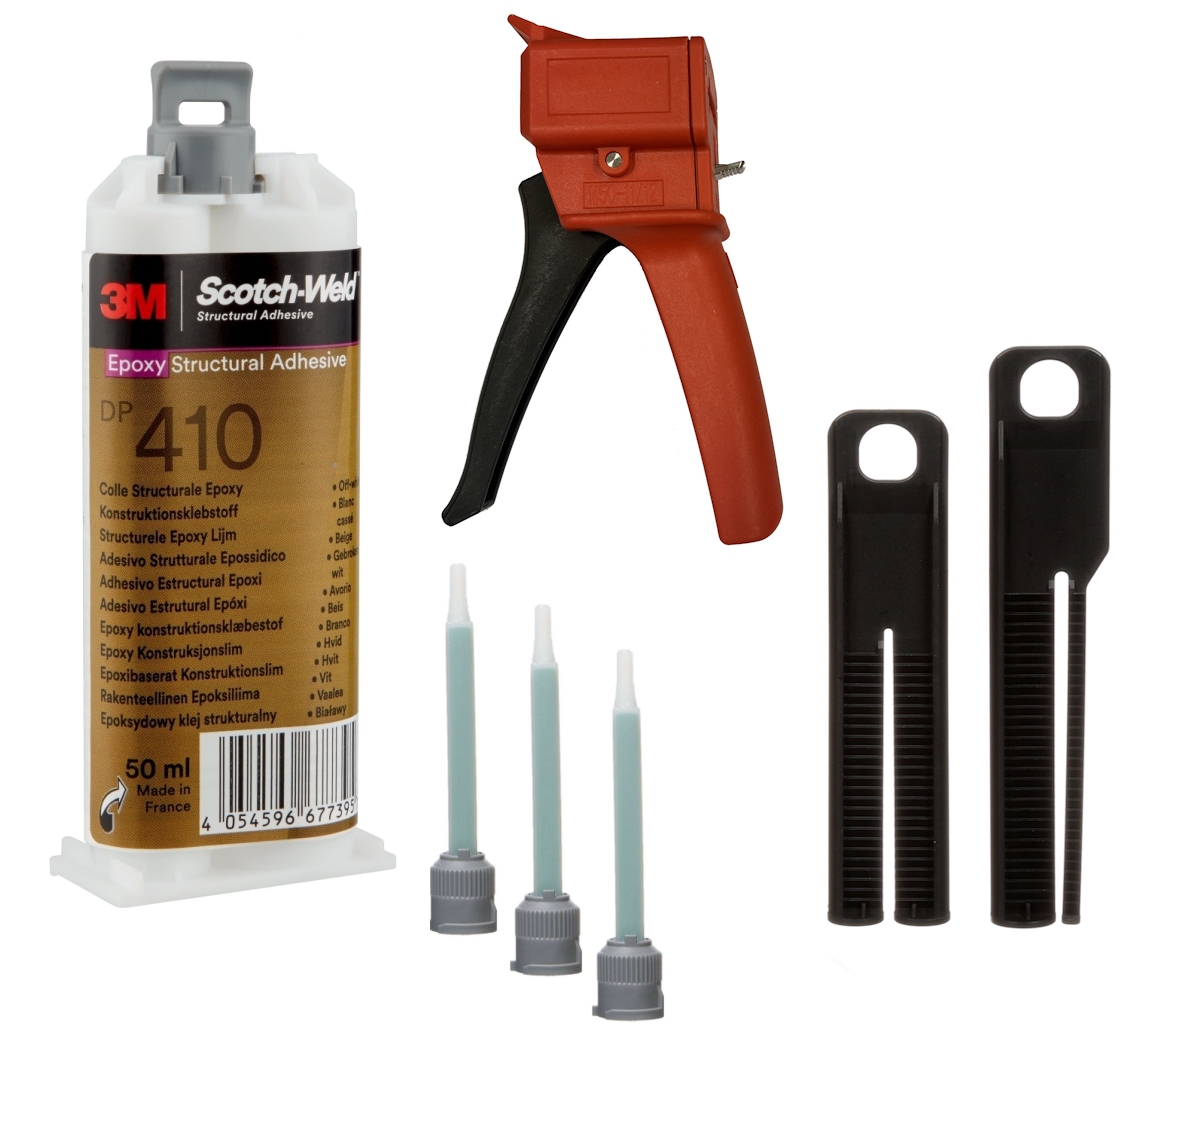 Starter set: 1x 3M Scotch-Weld 2-component construction adhesive EPX System DP410, beige, 50 ml, 1x S-K-S hand tool for EPX 38 to 50 ml cartridges incl. feed piston 2:1